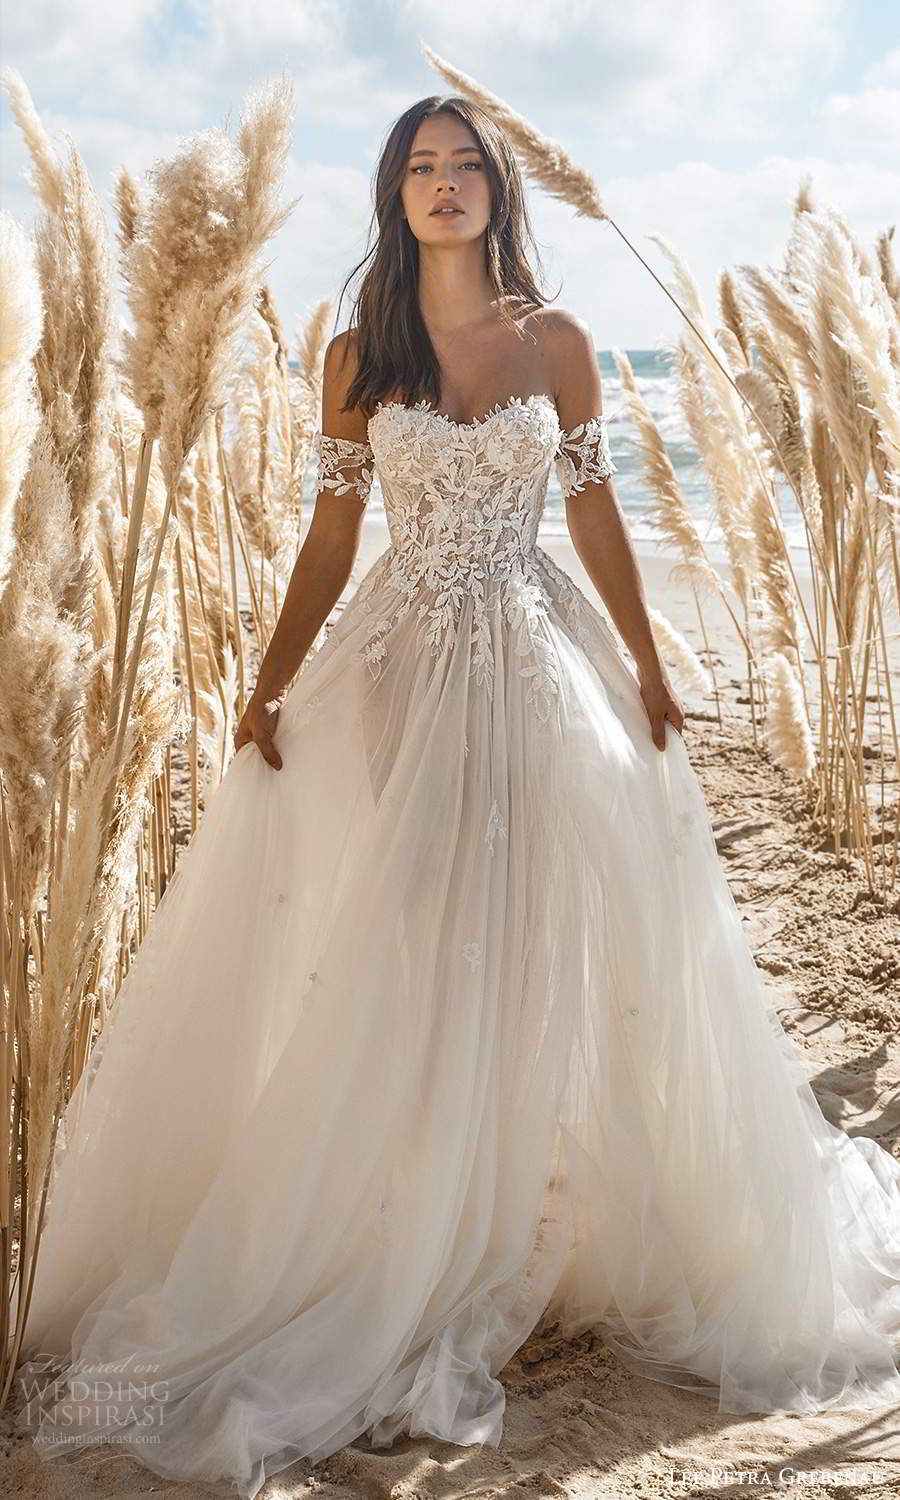 Some obvious points for strapless wedding
dresses